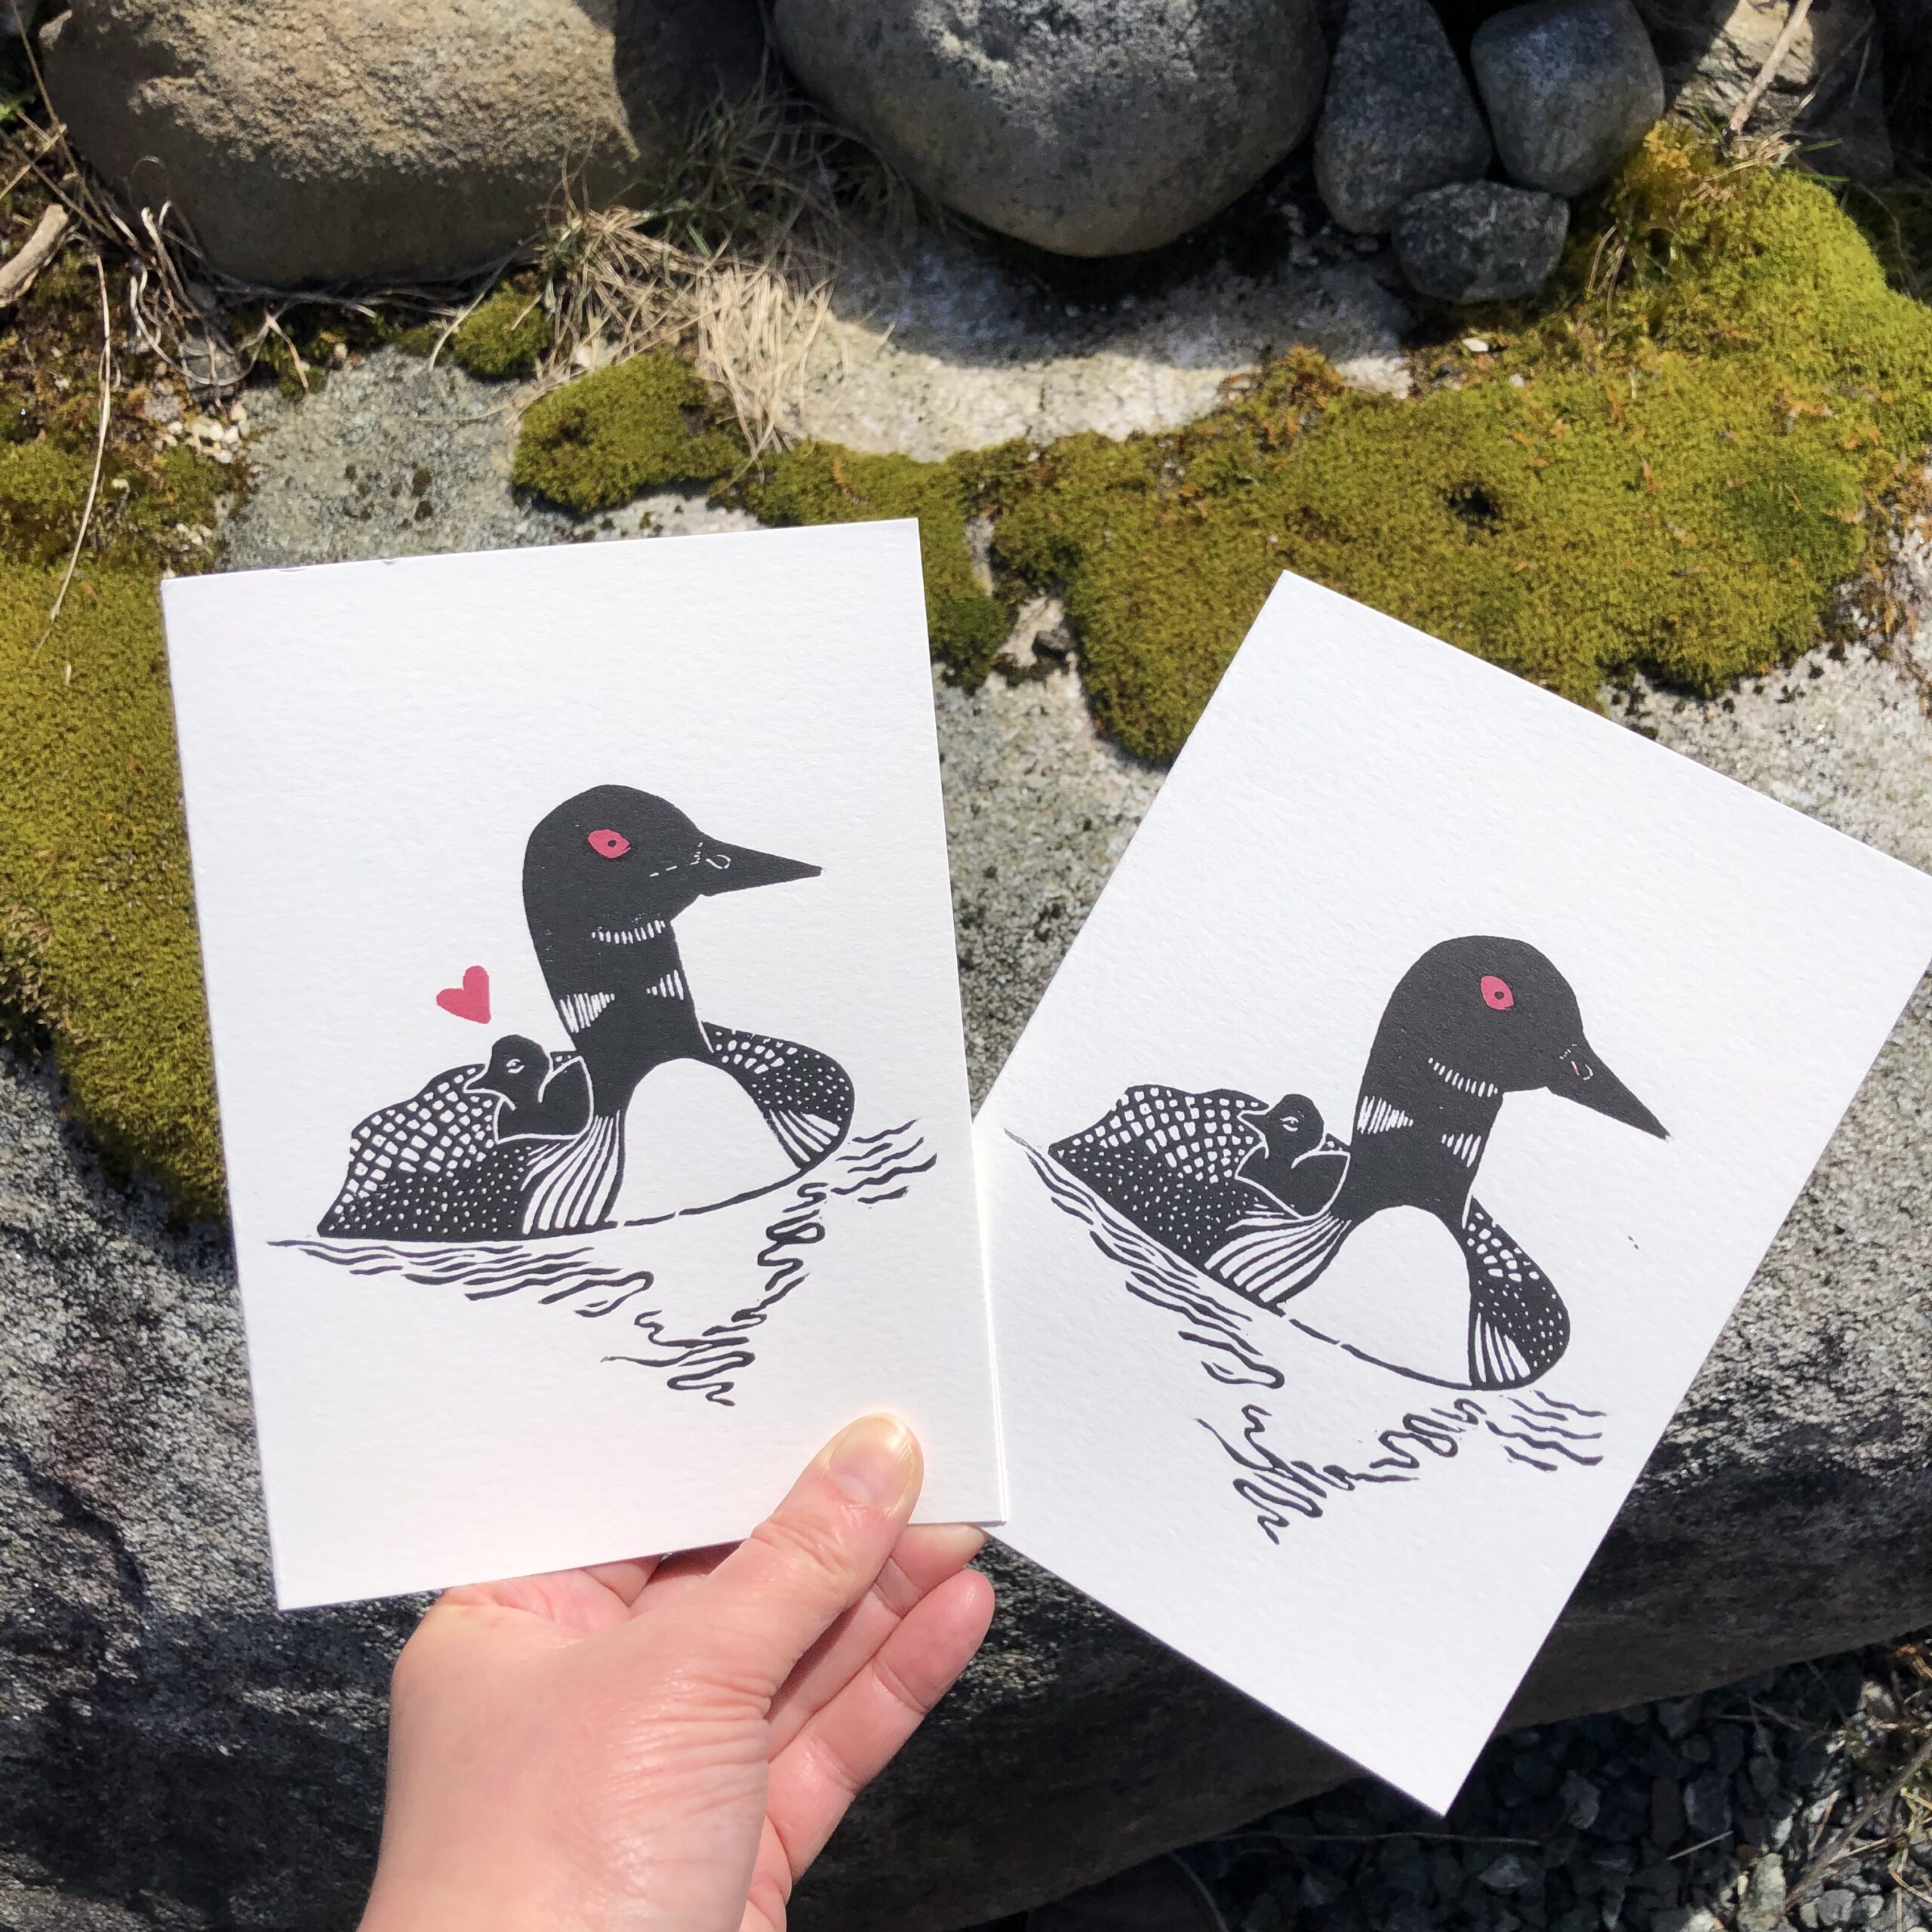 Two white cards, each printed with a black-and-white common loon and chick. The chick rides on its parent’s back. The card on the left also has a small red heart above the chick. Both cards show the adult loon with a red eye.